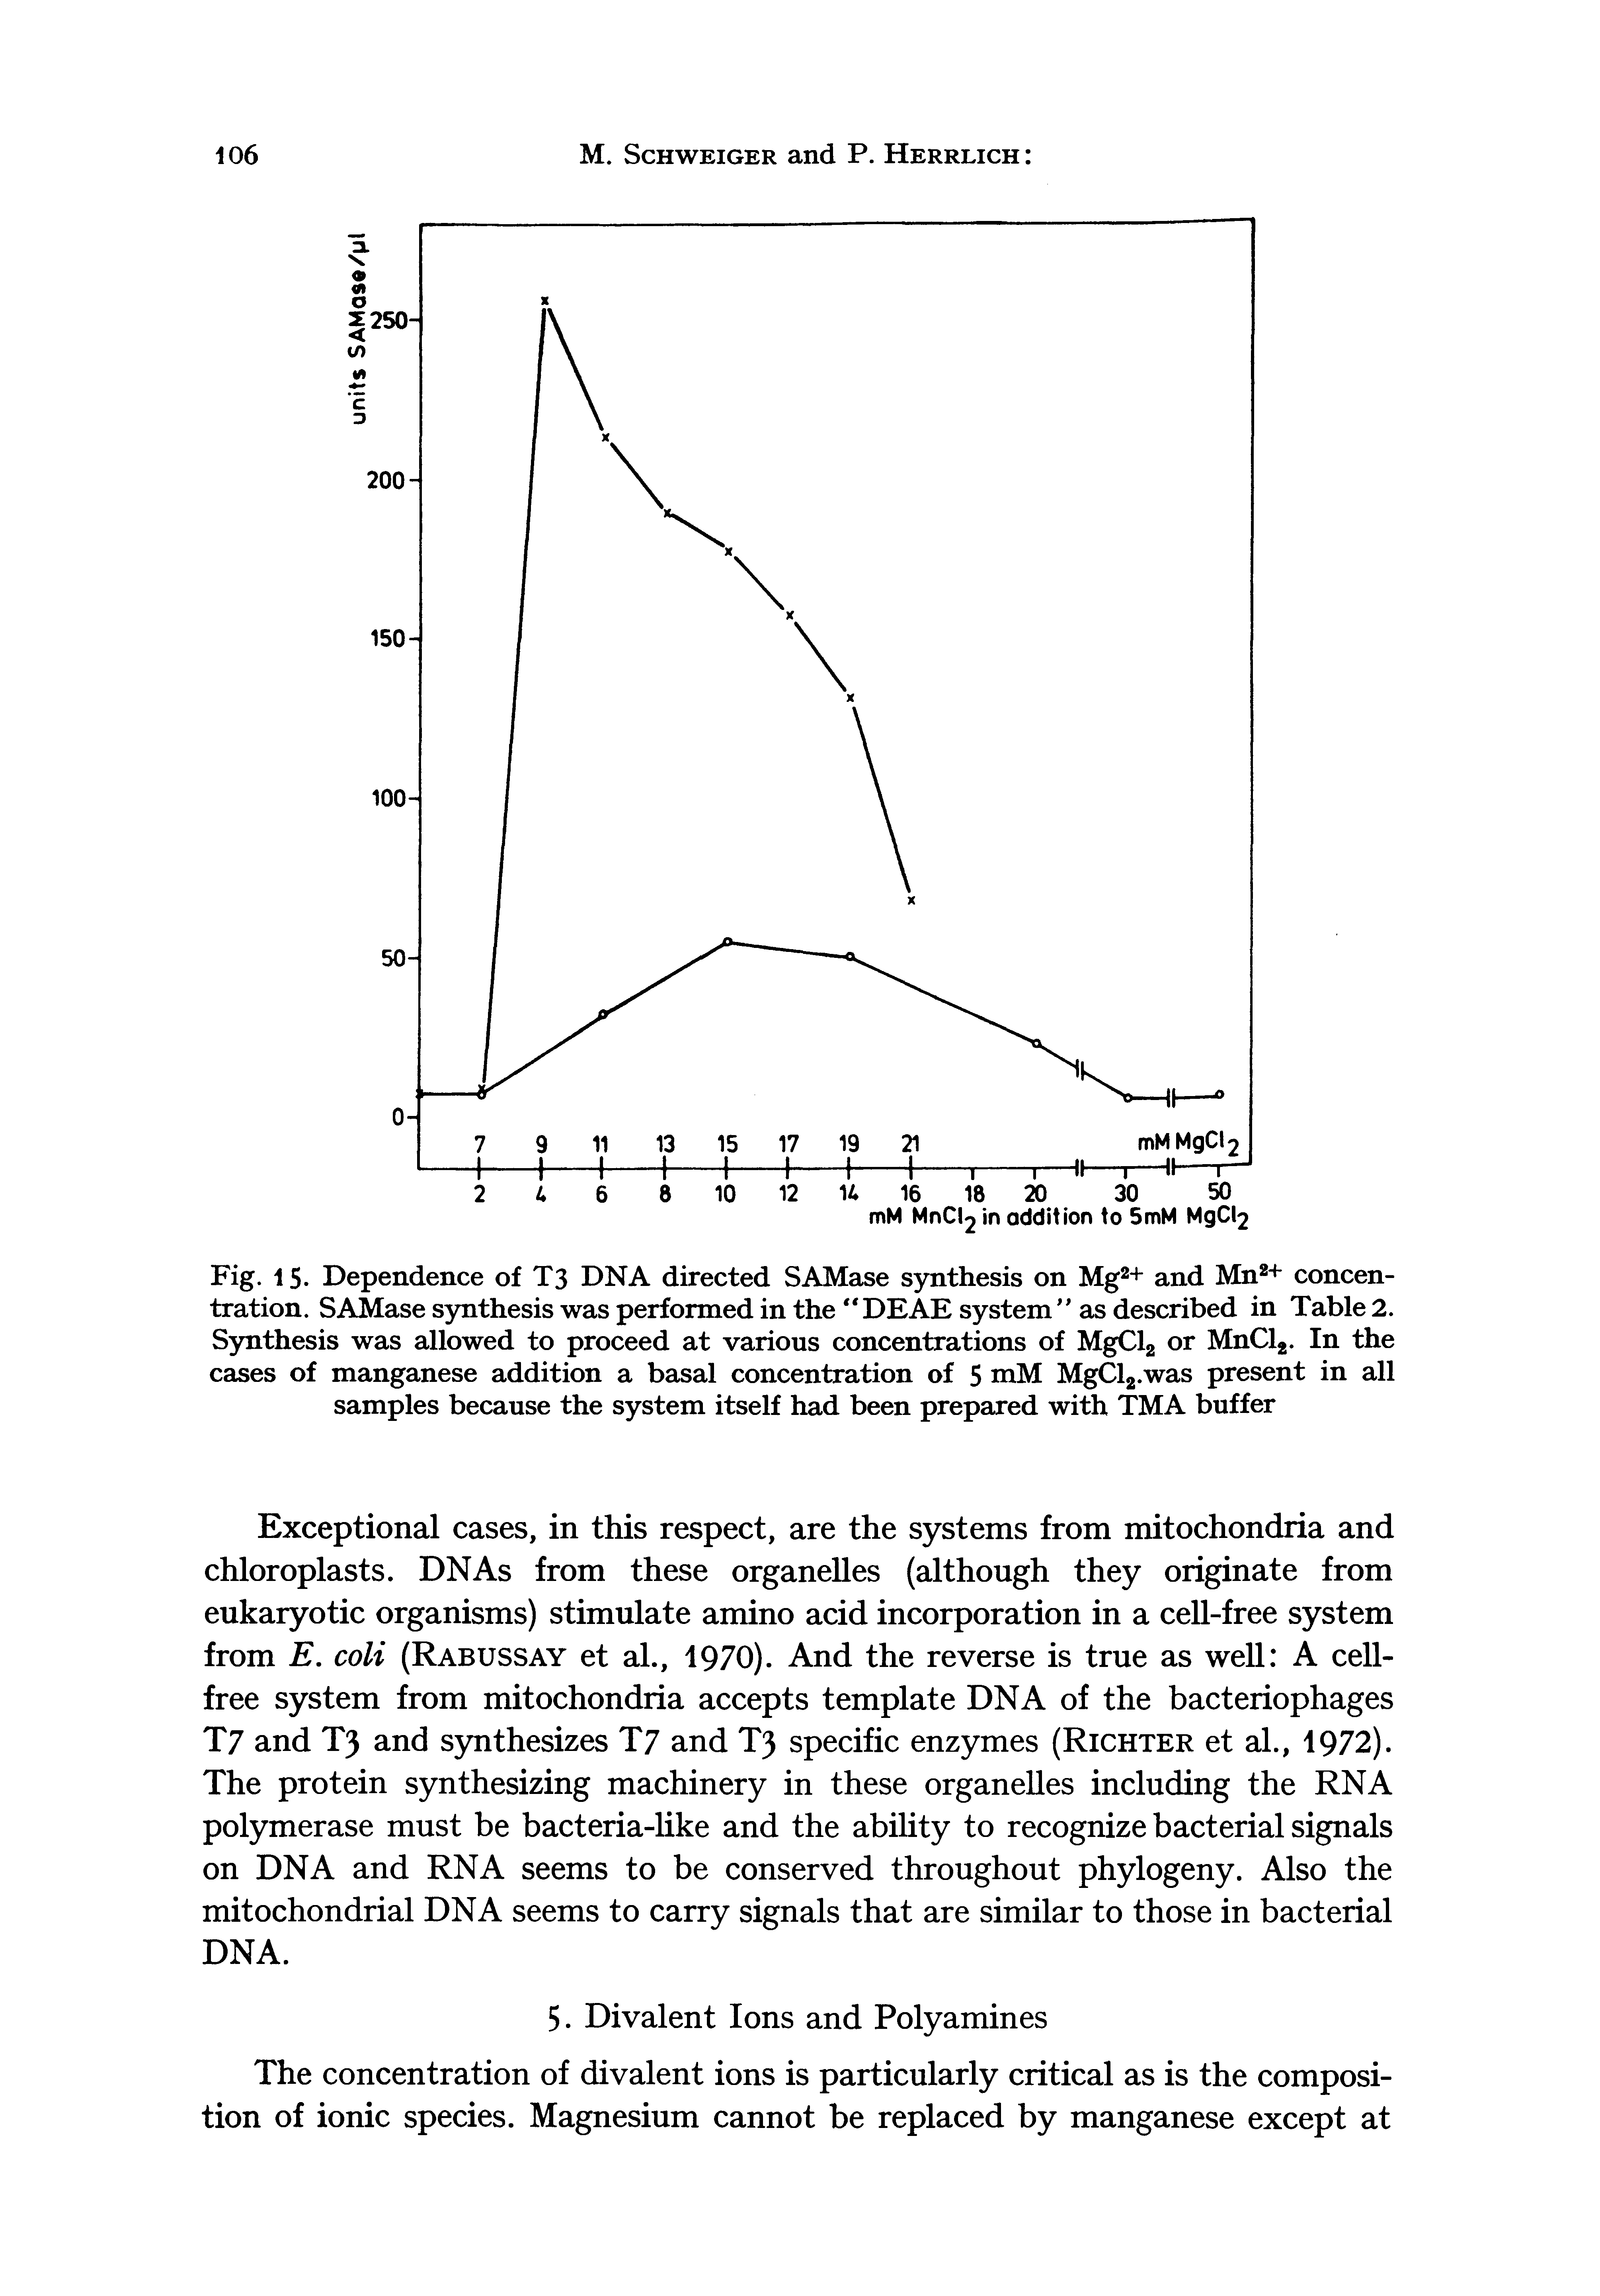 Fig. 15. Dependence of T3 DNA directed SAMase synthesis on Mg + and Mn + concentration. SAMase synthesis was performed in the DEAE system as described in Table 2. Synthesis was allowed to proceed at various concentrations of MgClg or MnClg. In the cases of manganese addition a basal concentration of 5 mM MgClj.was present in all samples because the system itself had been prepared with TMA buffer...